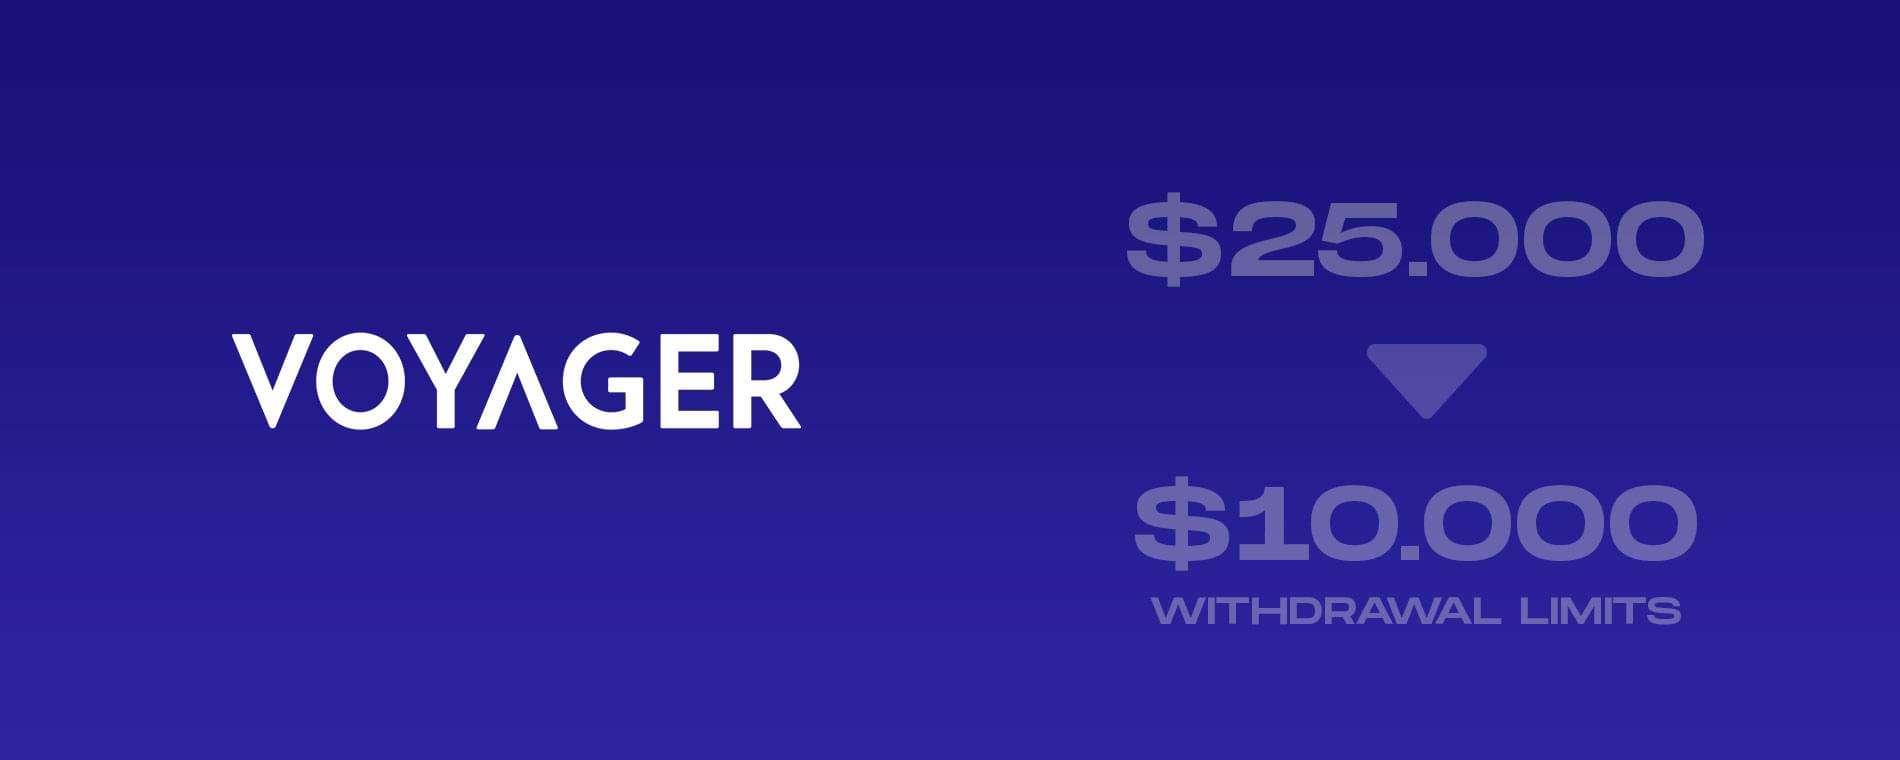 Voyager app lowers daily withdrawal limits - crisis continues